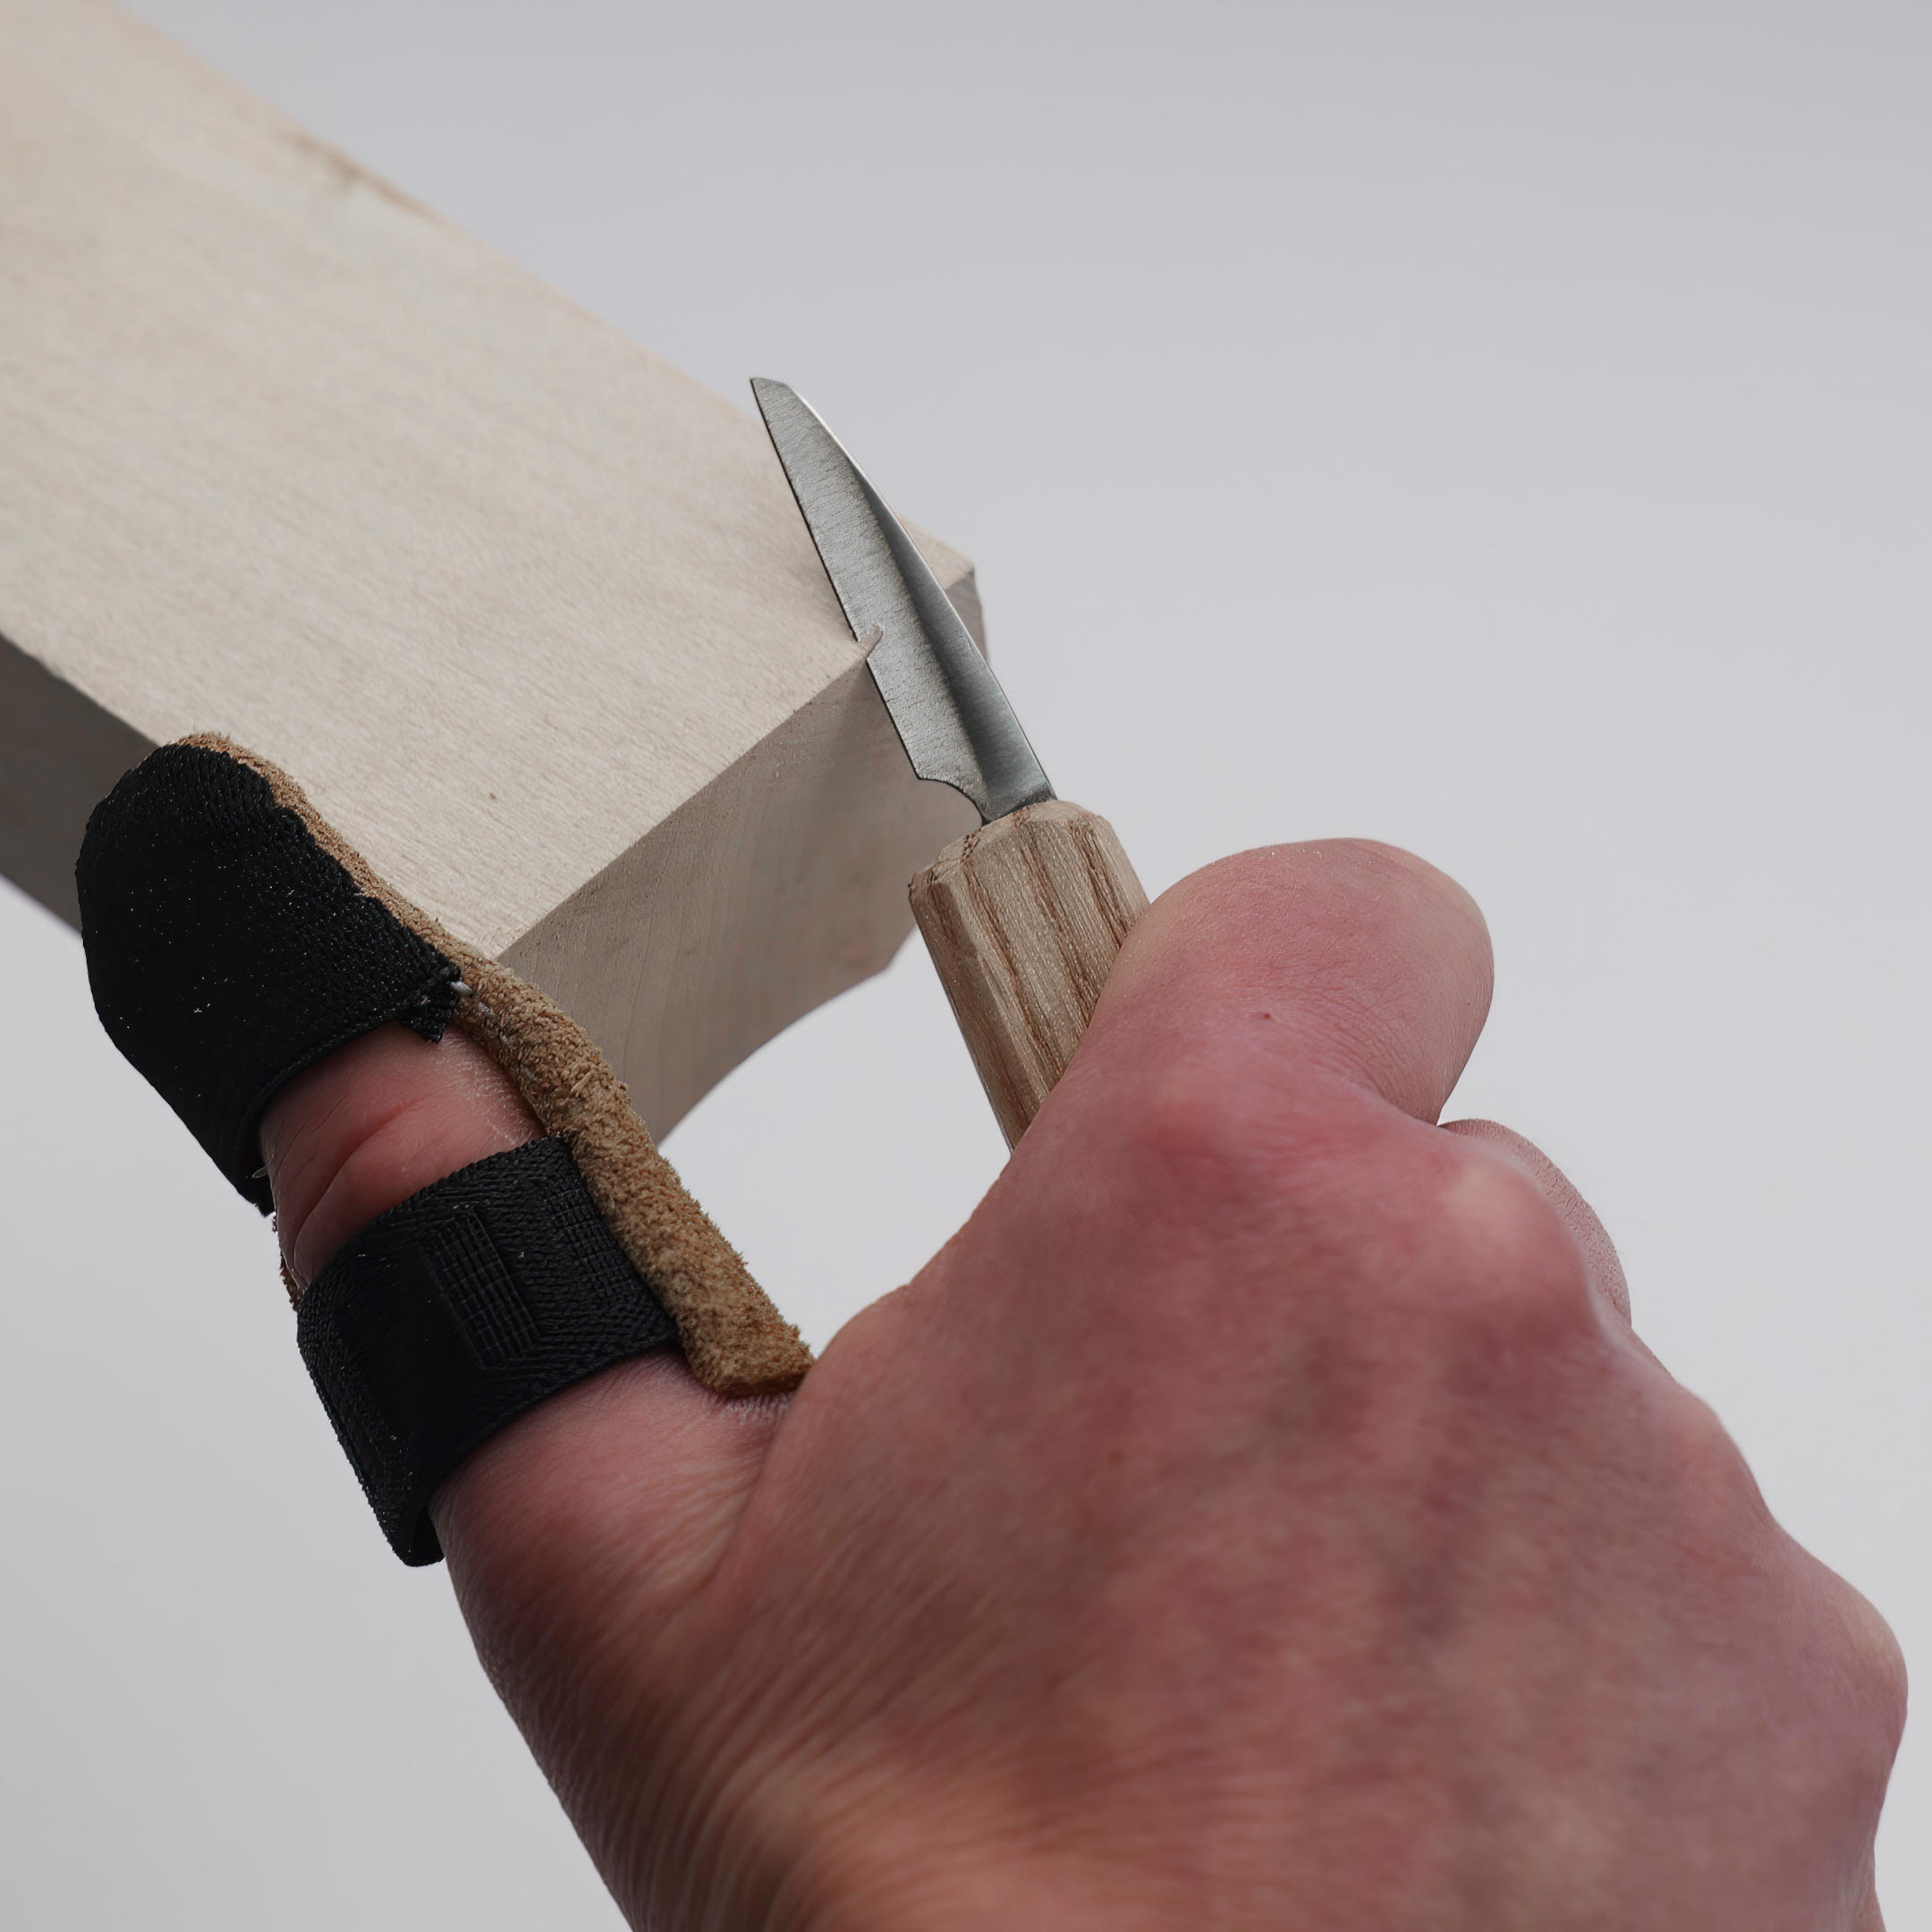 A thumb guard on the knife hand.